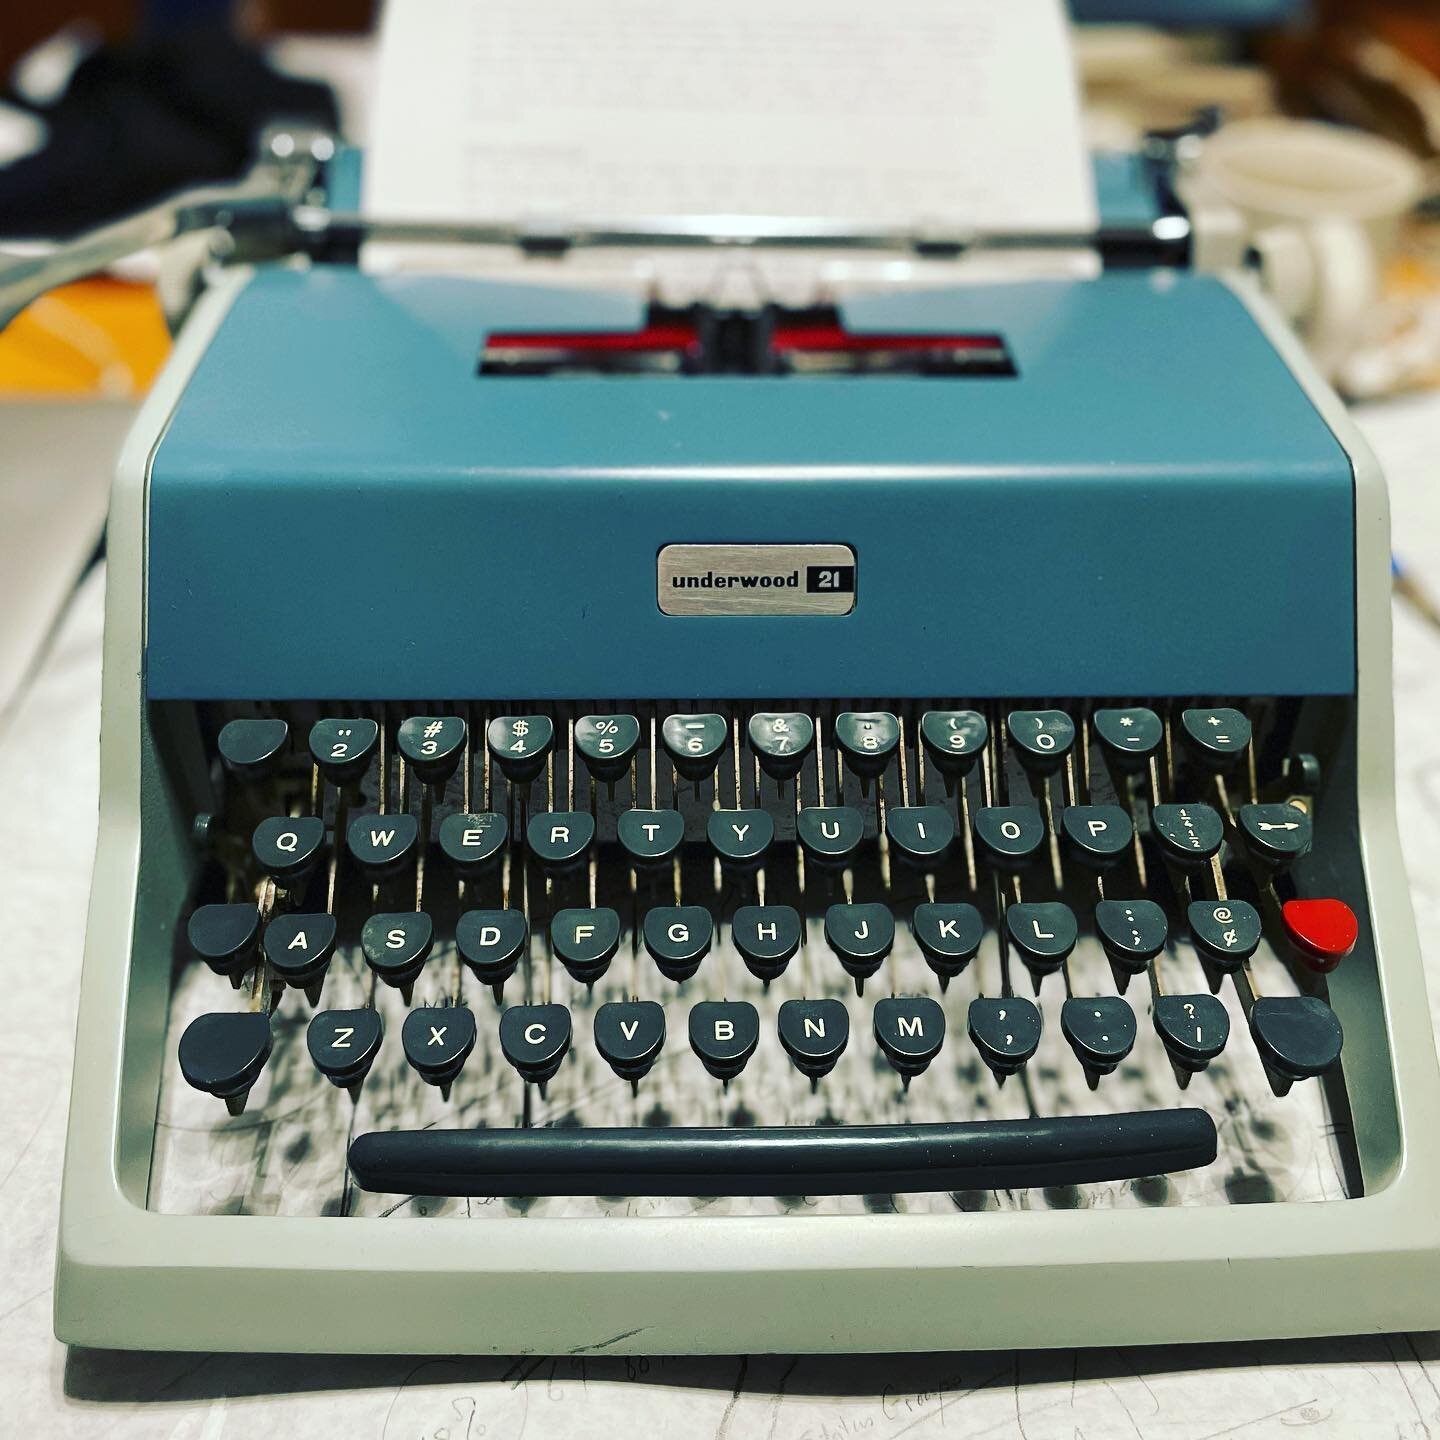 Switching gears this morning, and exercising my fingers on the Underwood 21.